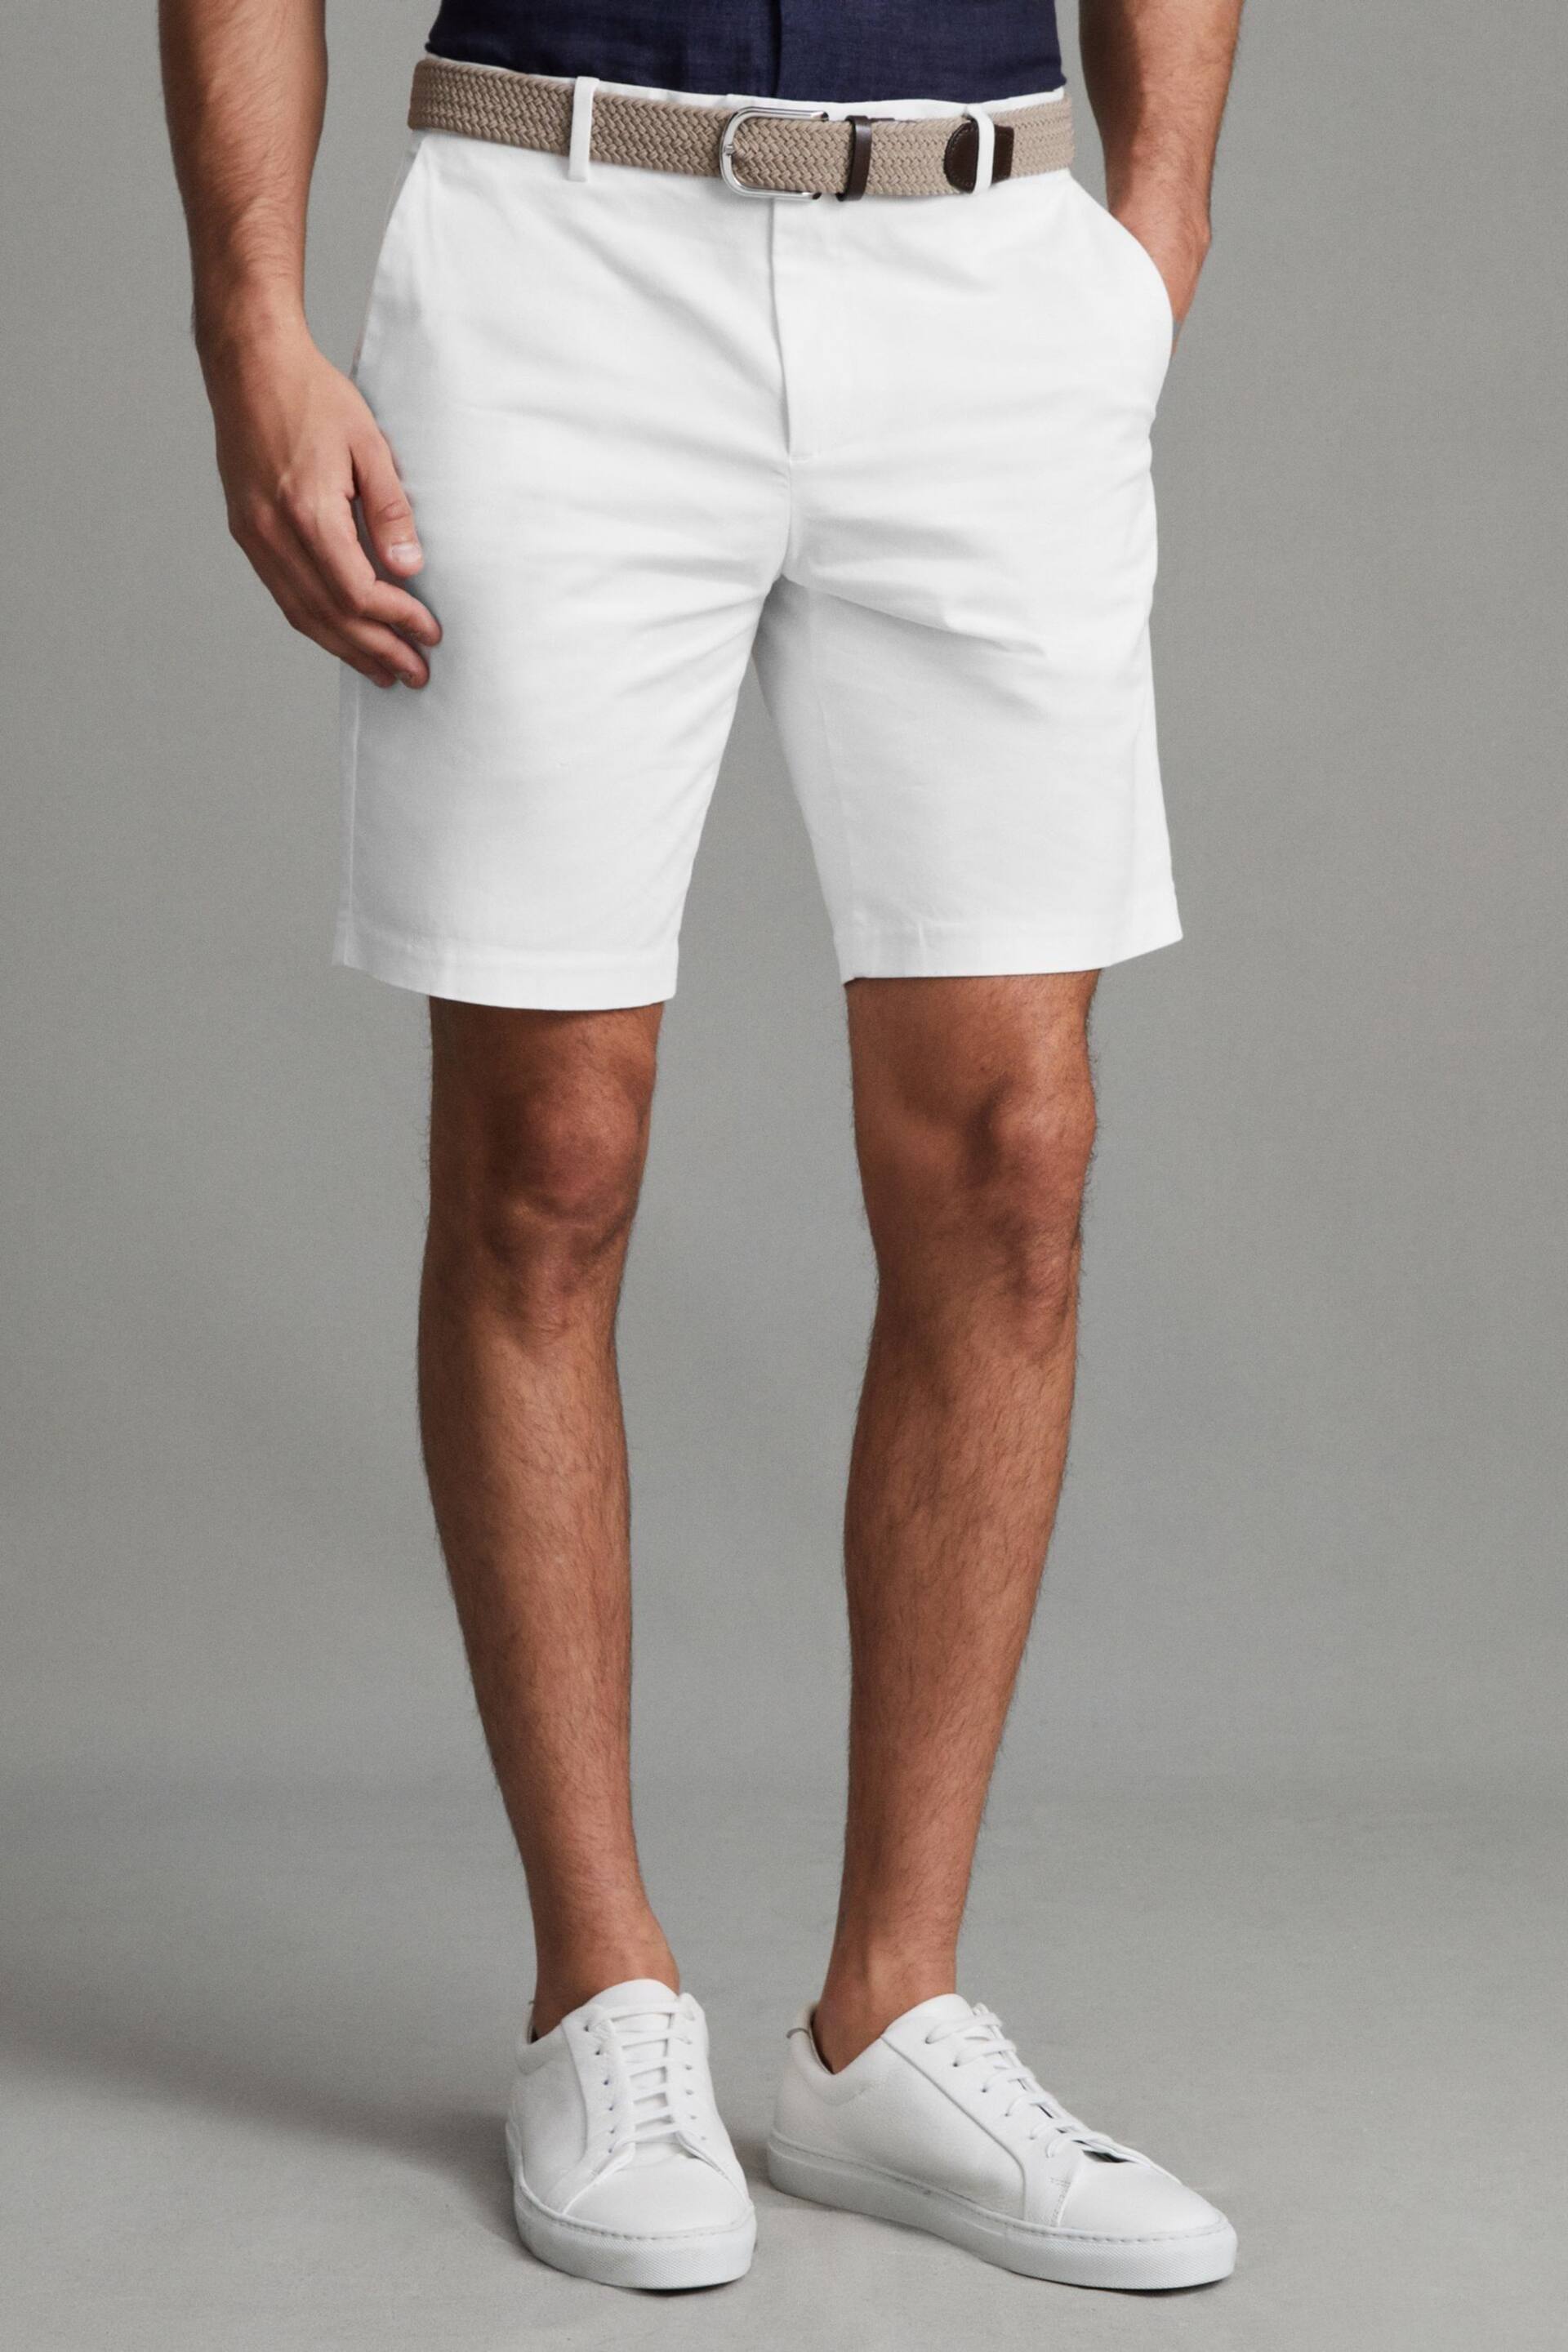 Reiss White Wicket Modern Fit Cotton Blend Chino Shorts - Image 1 of 6